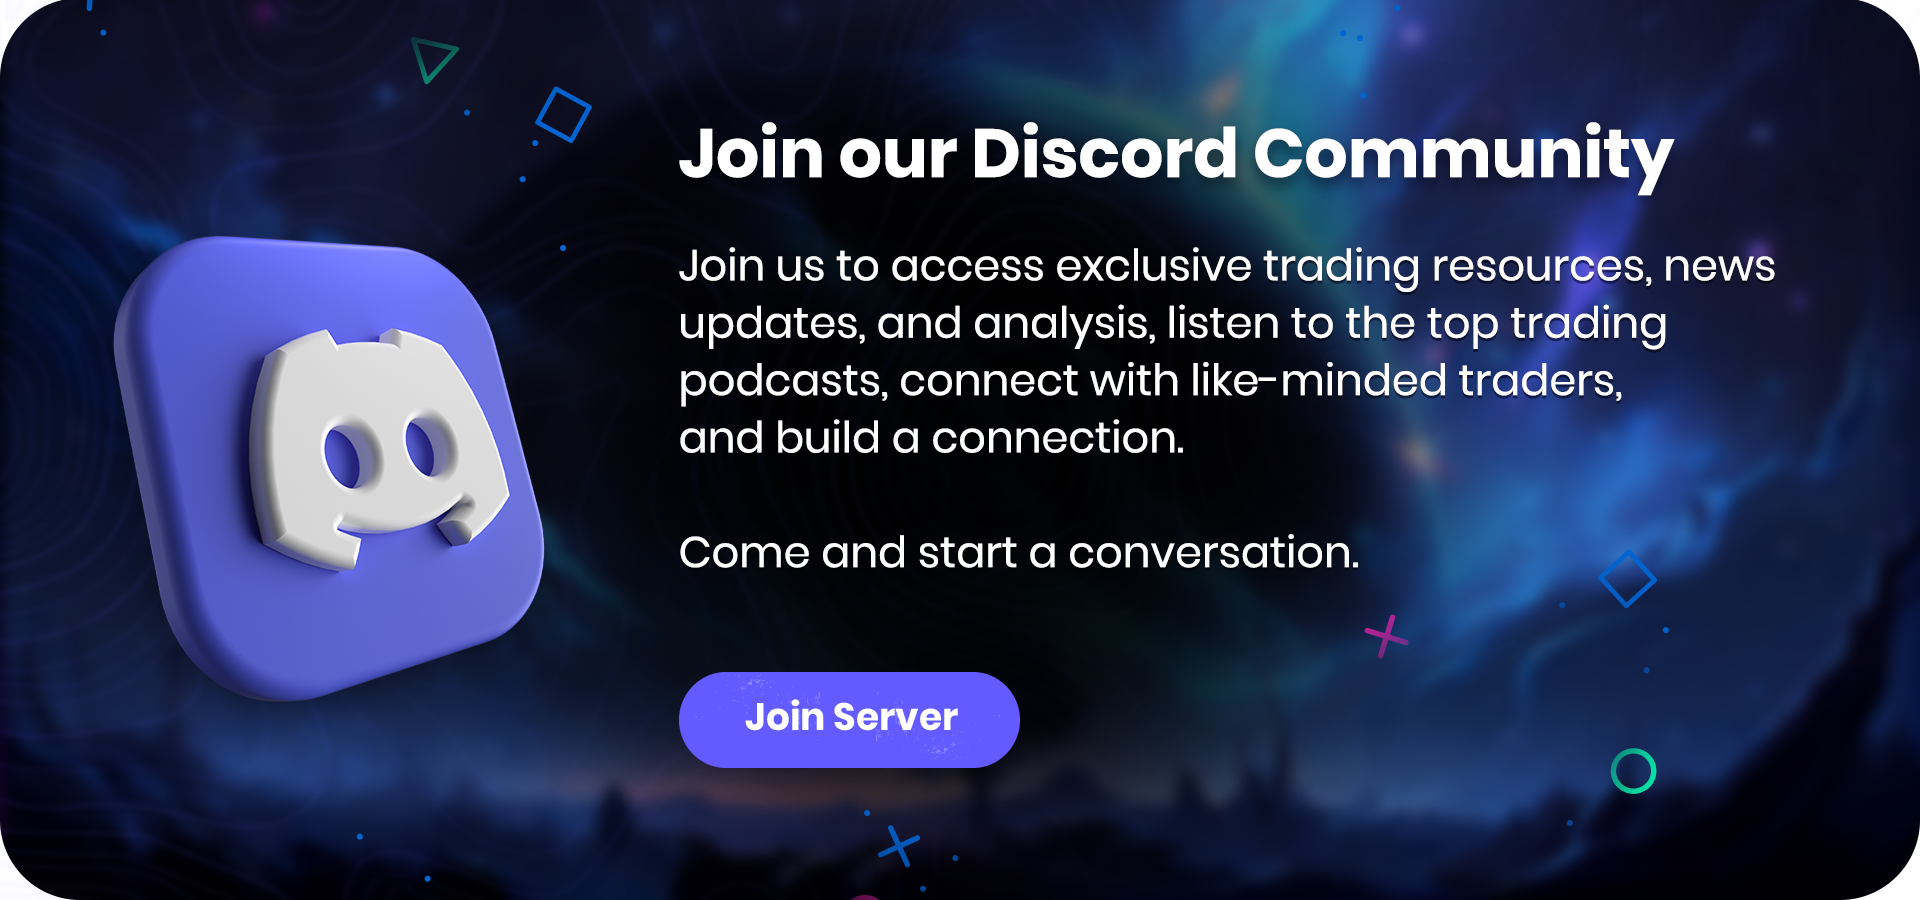 BREAKING NEWS] Exclusive Access to Our Discord Server! Join the